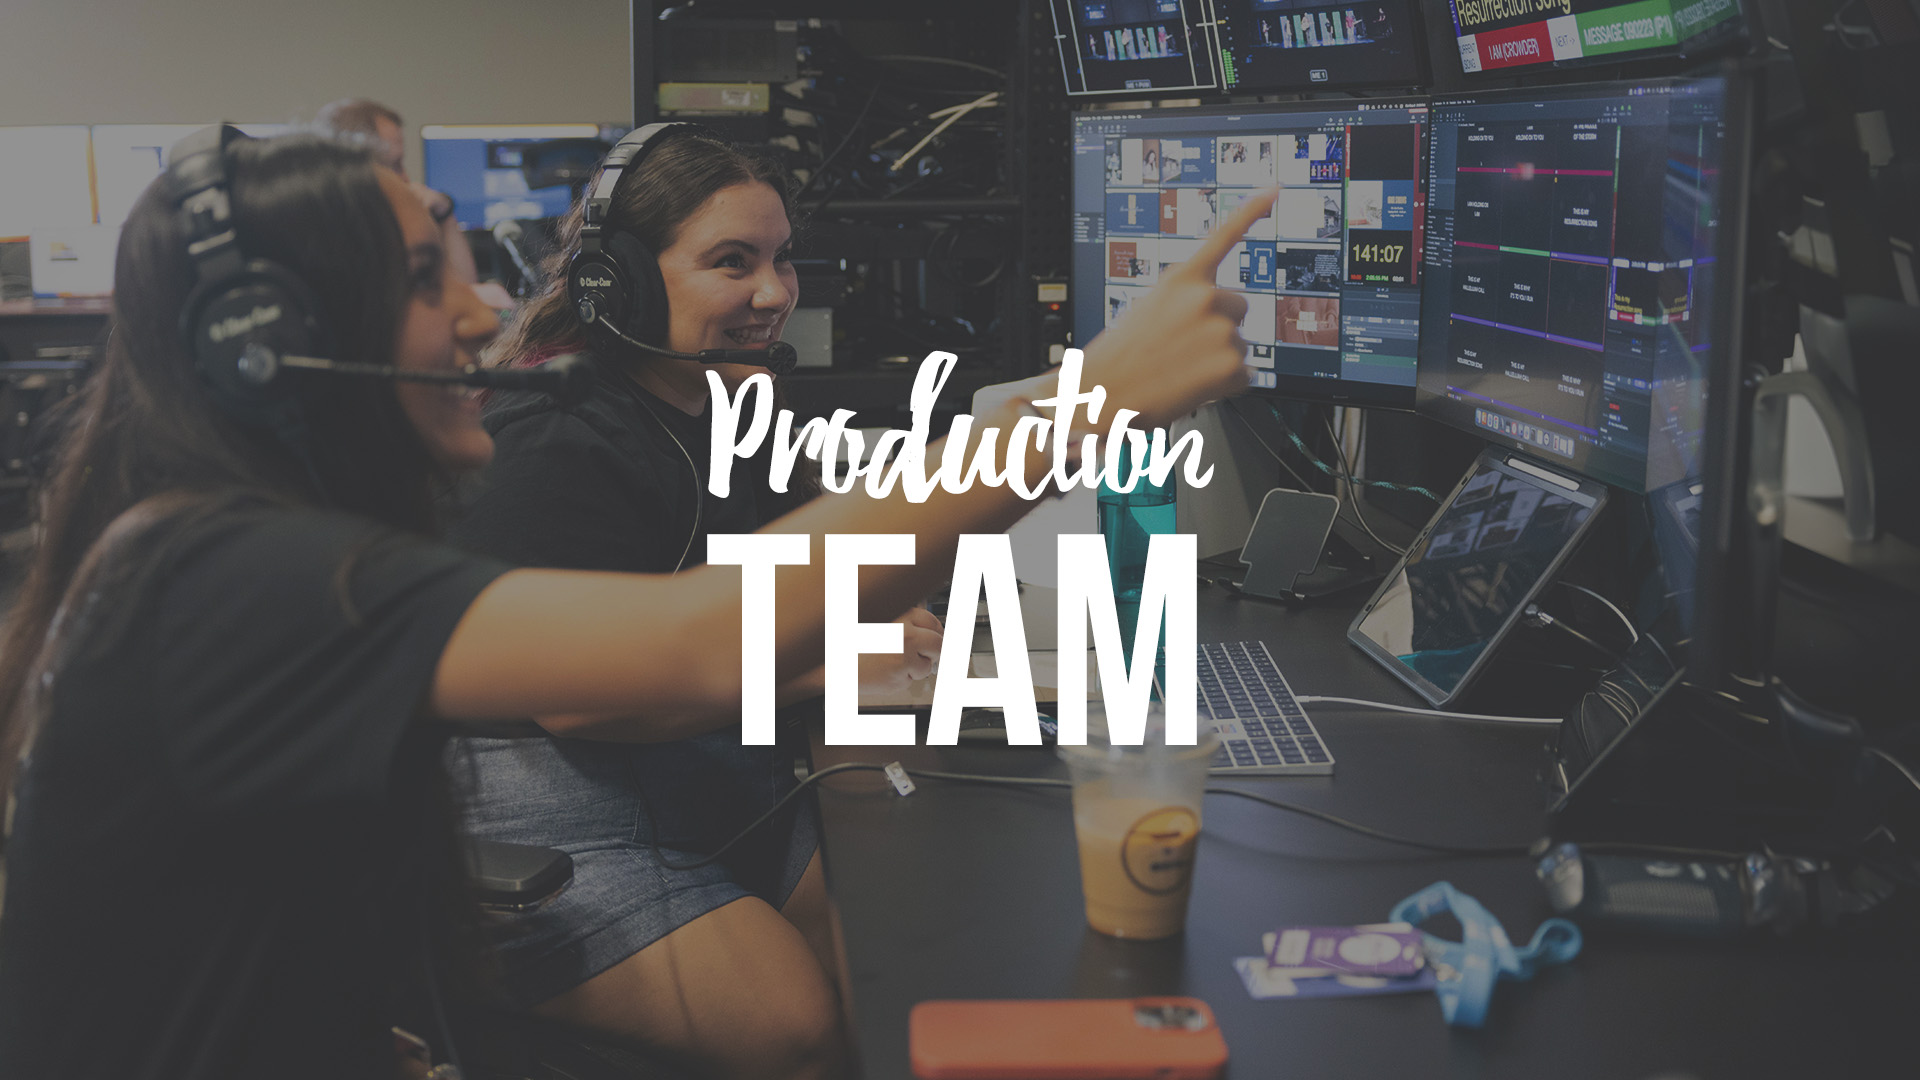 Volunteer with Production Team

 
